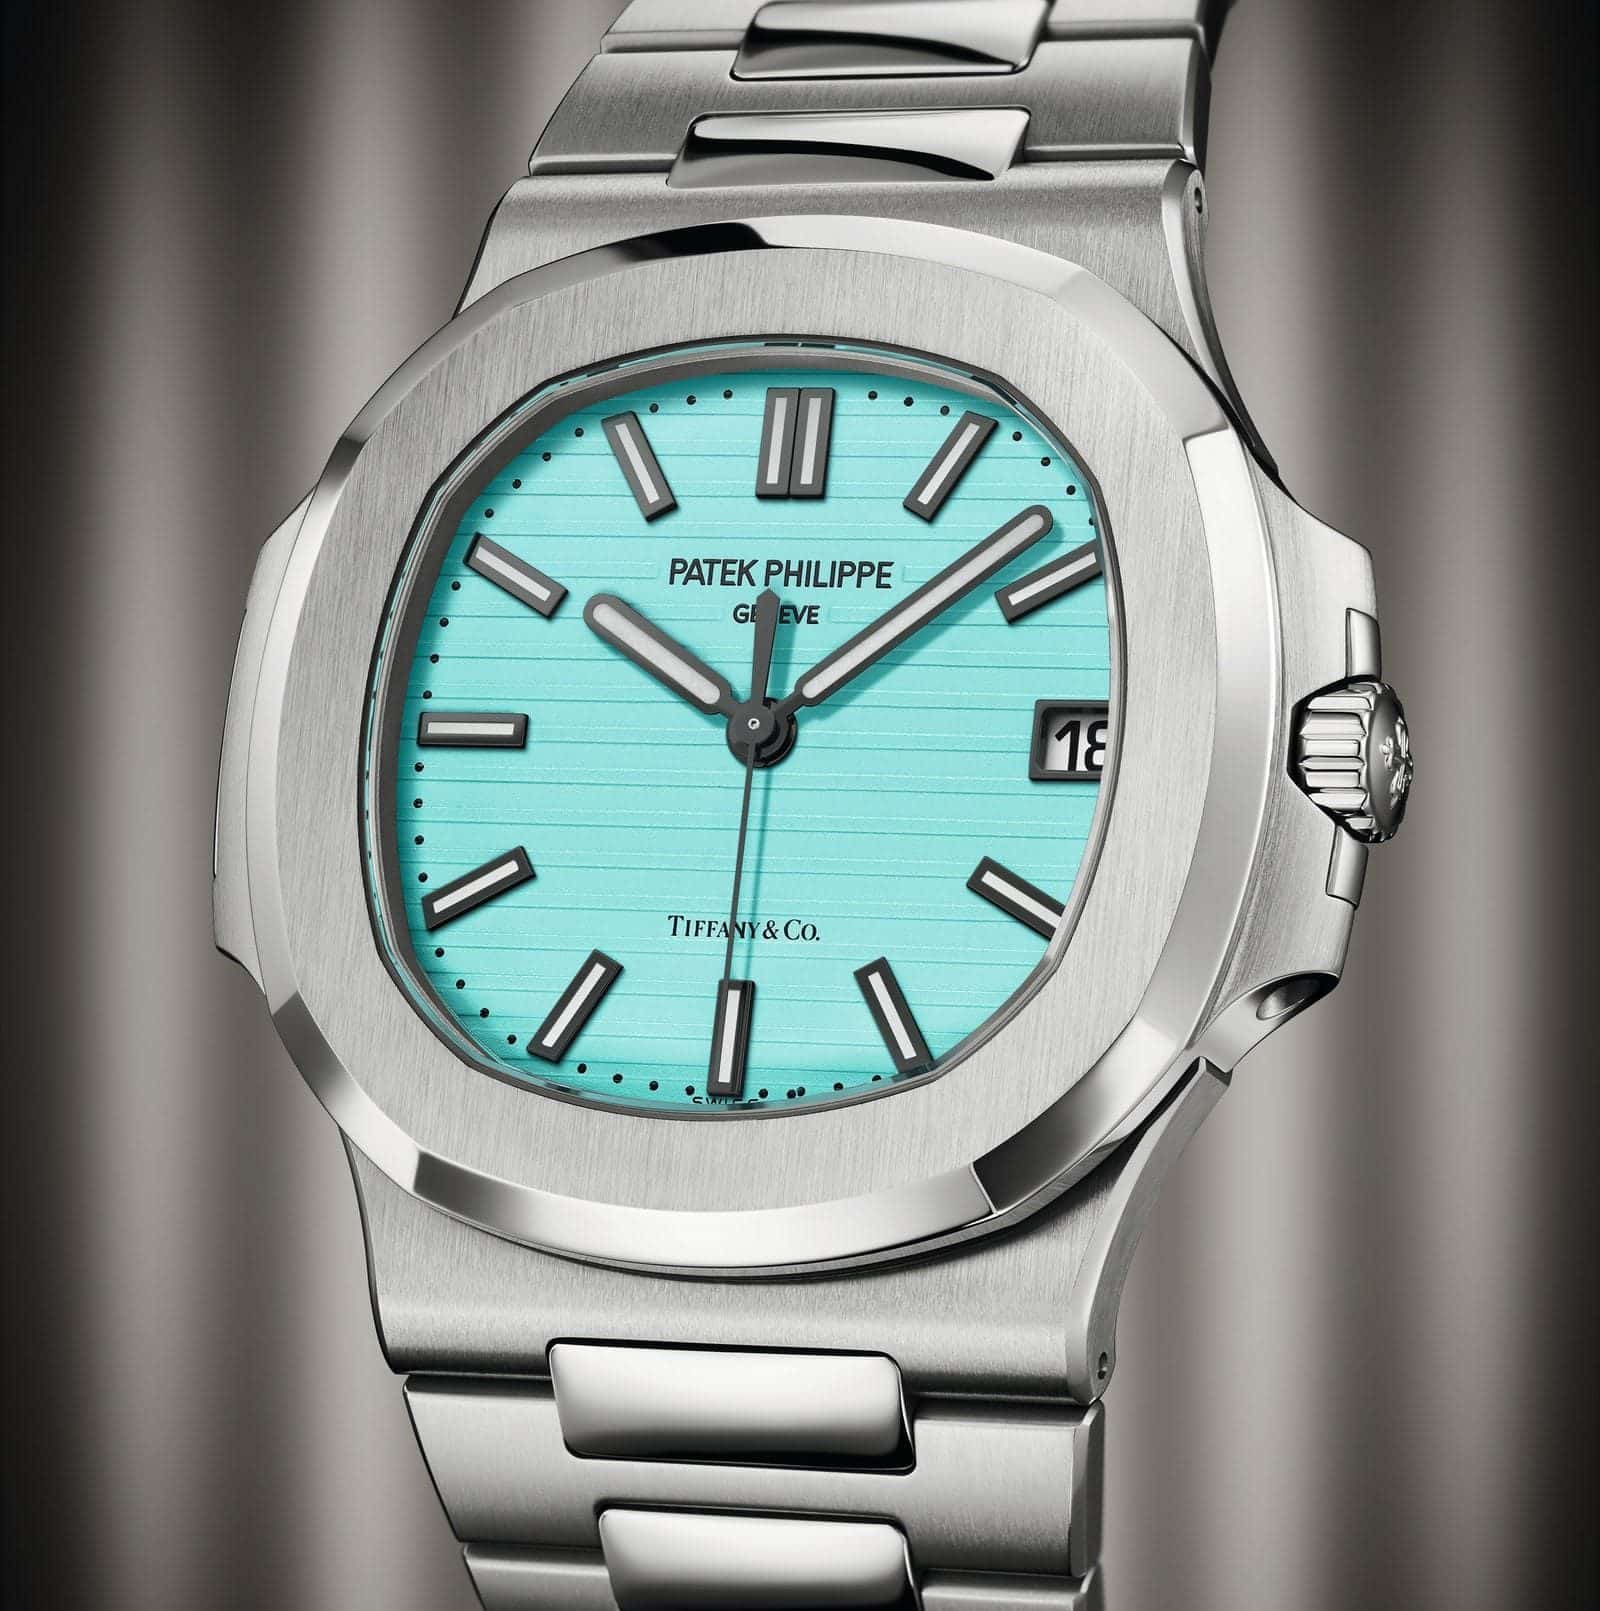 Patek Philippe watch in collaboration with Tiffany & Co sold for over ...